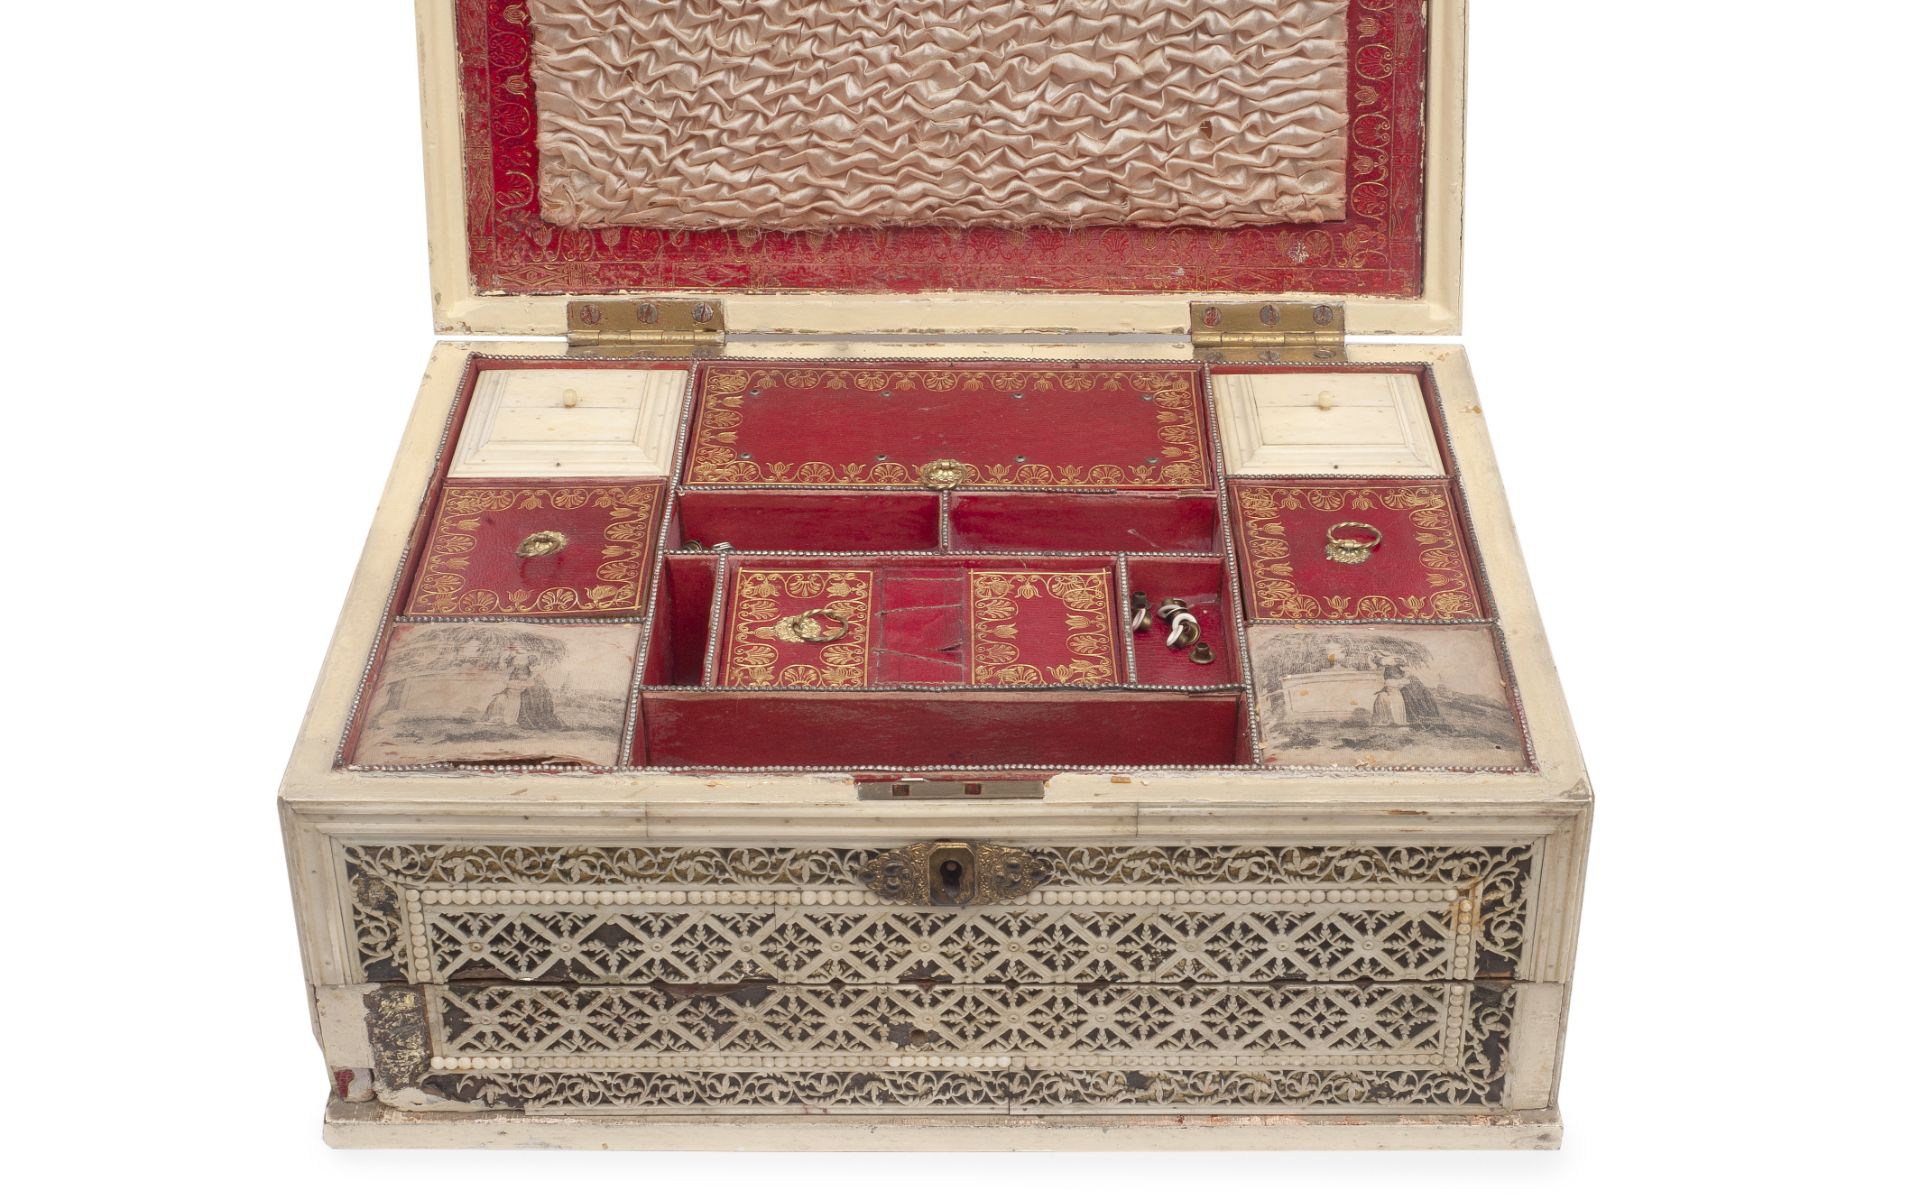 A LATE 18TH / EARLY 19TH CENTURY RUSSIAN BONE VENEERED CASKET, KHOLMOGORY - Image 4 of 5